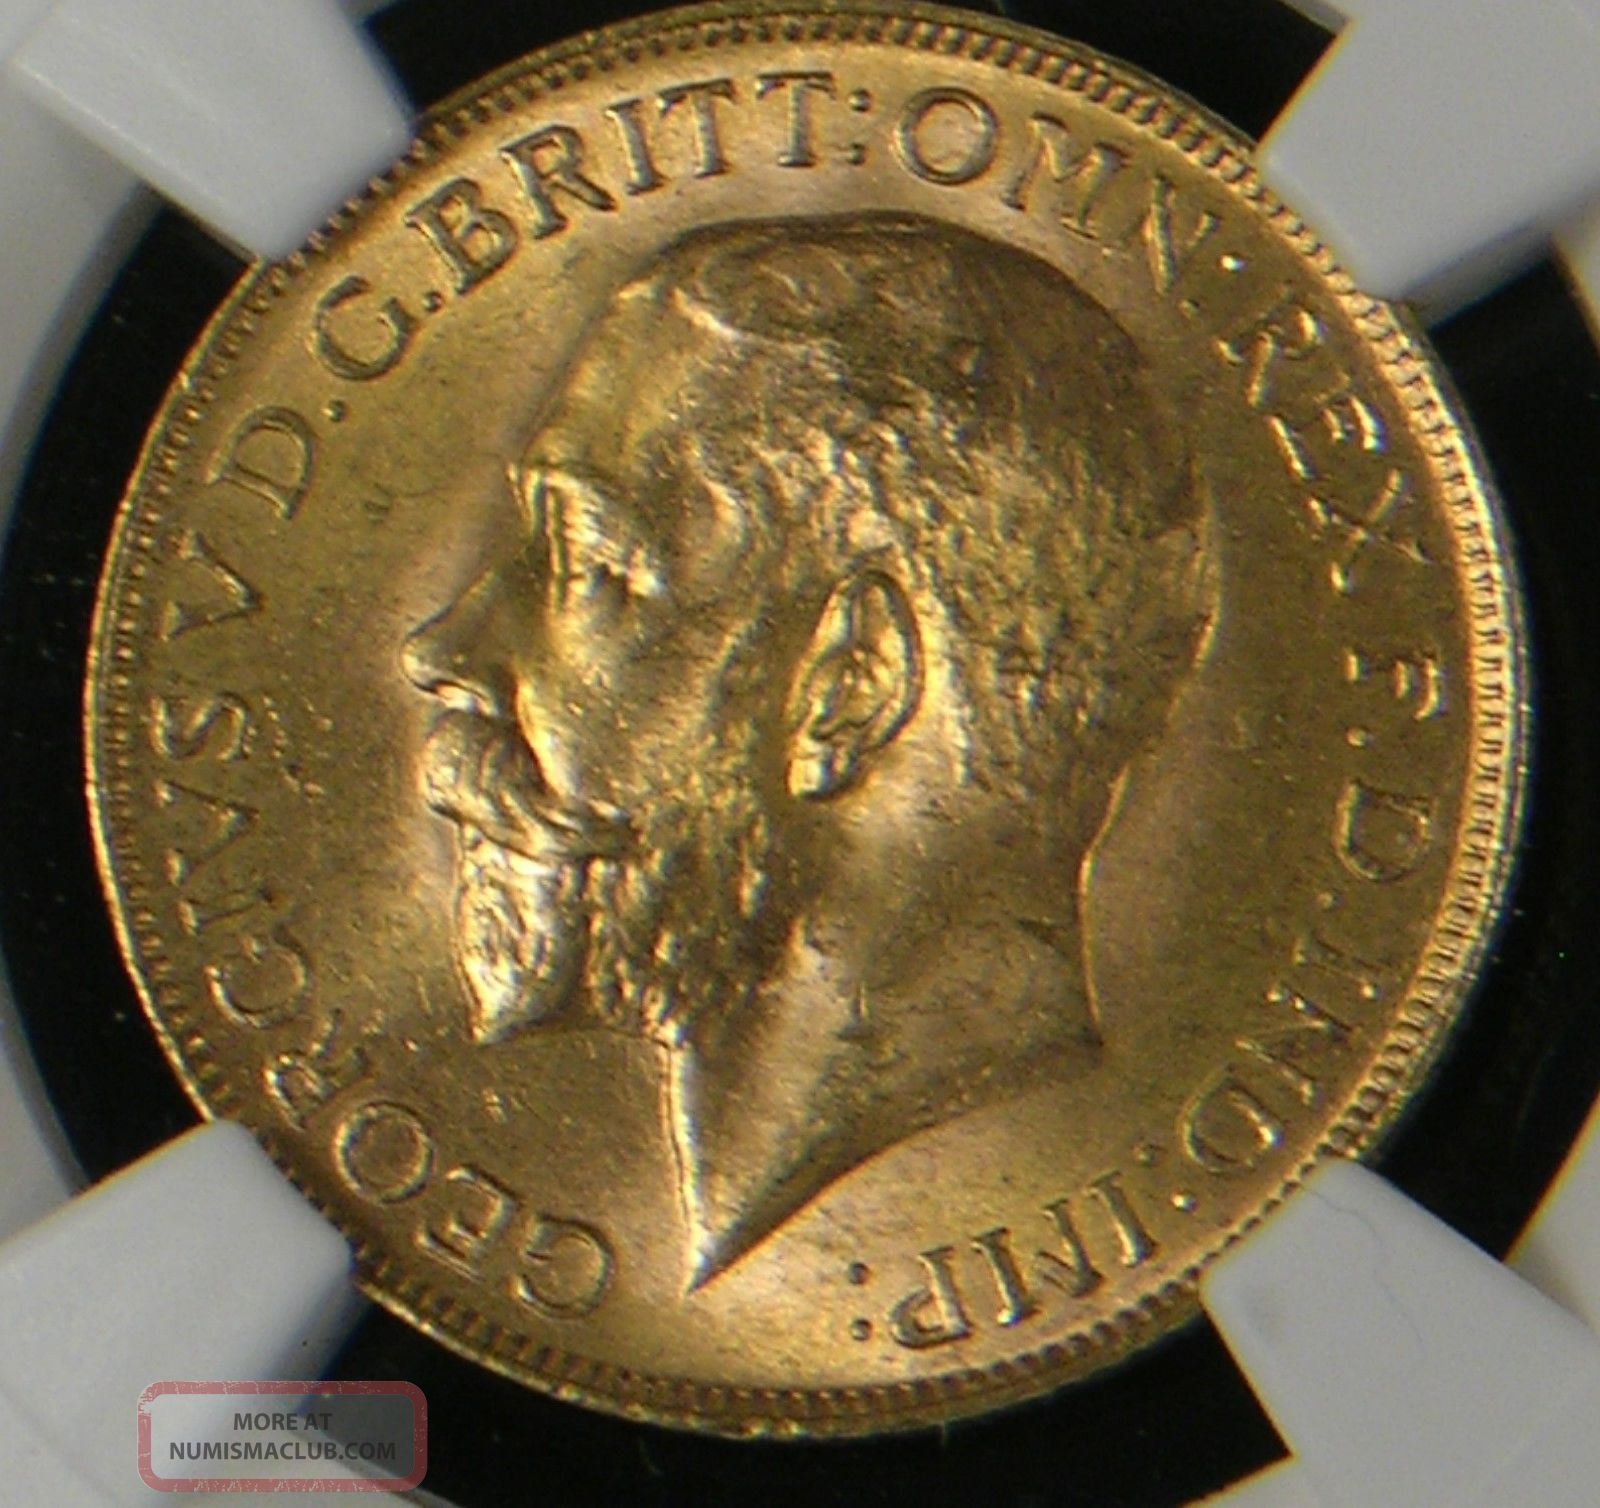 South Africa 1927 Gold Sovereign Ngc Ms - 64 Sharp Bright Lustrous